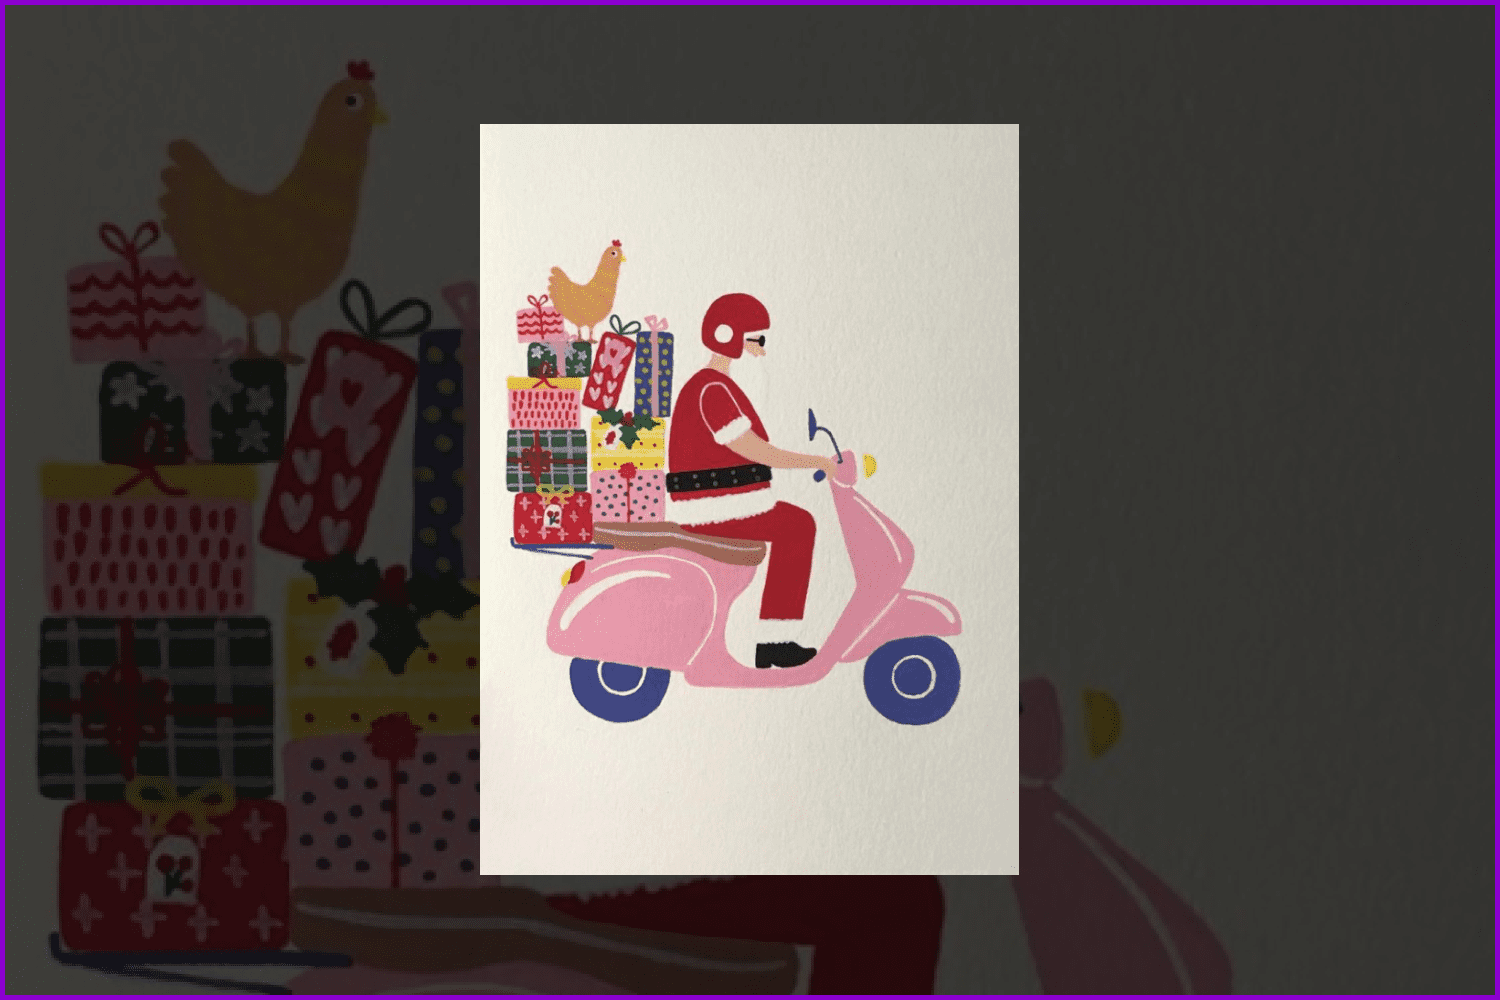 Santa on the motorcycle with presents.